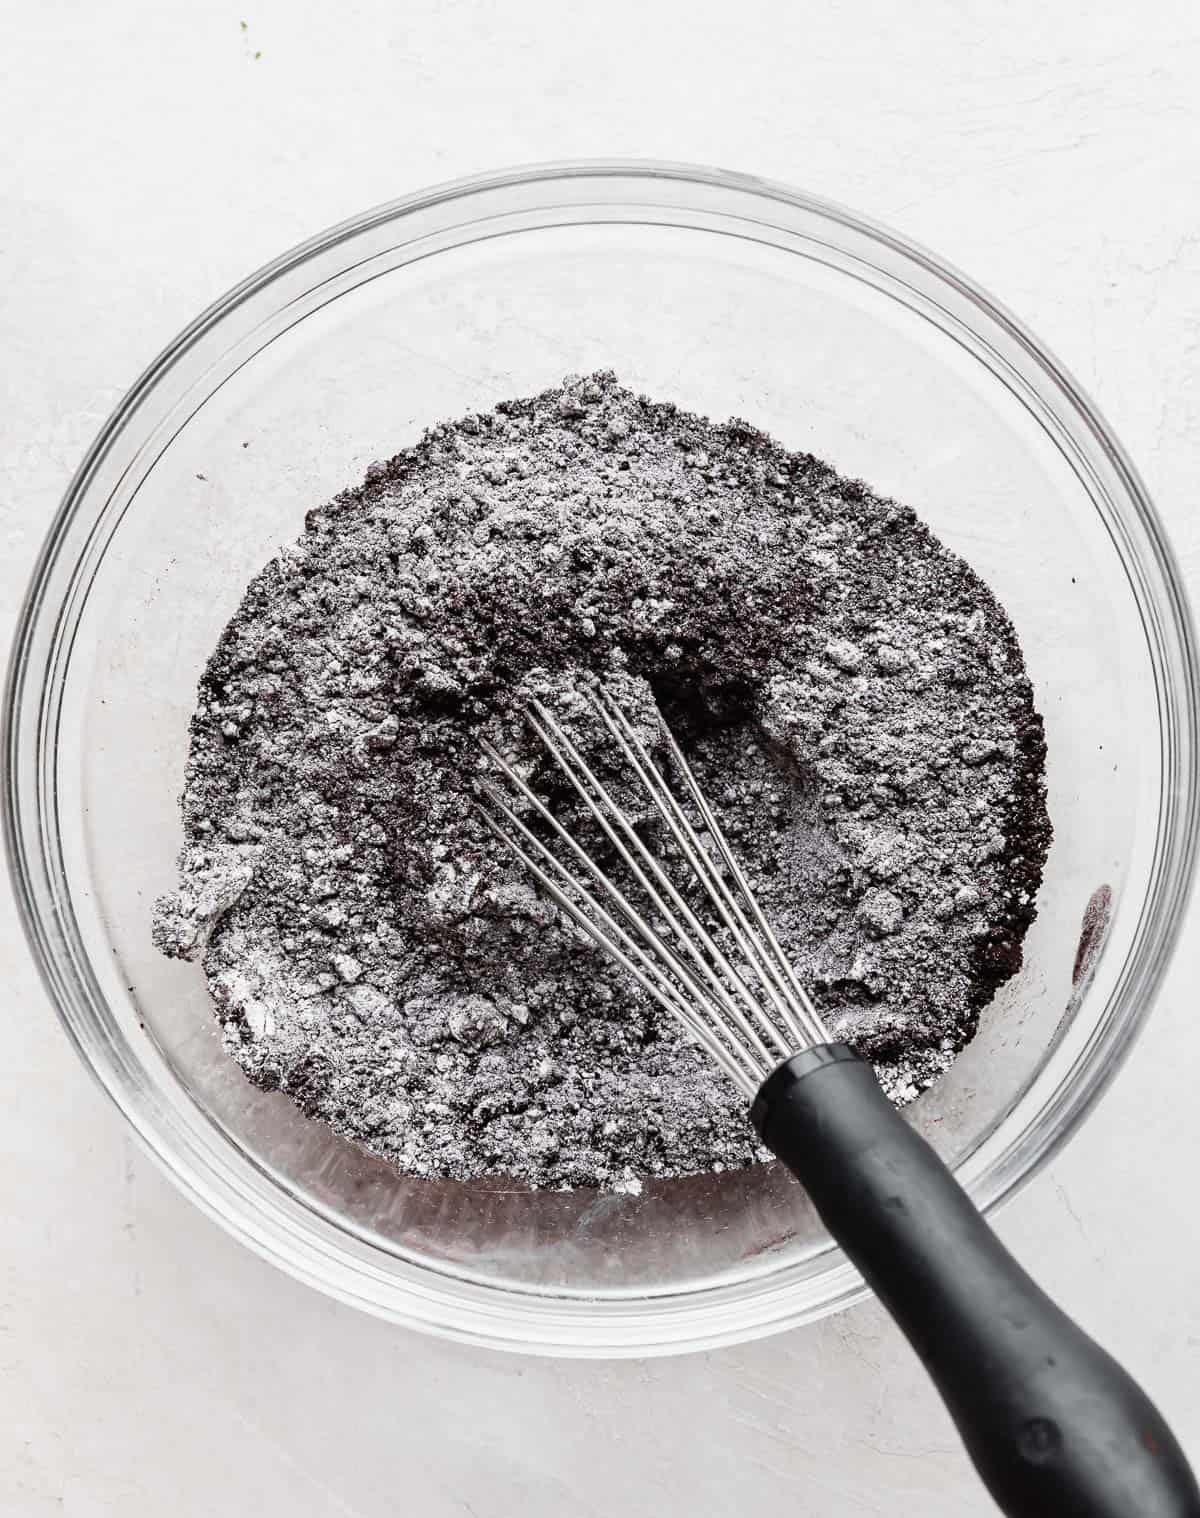 Dry ingredients to make Oreo Donuts in a glass bowl.